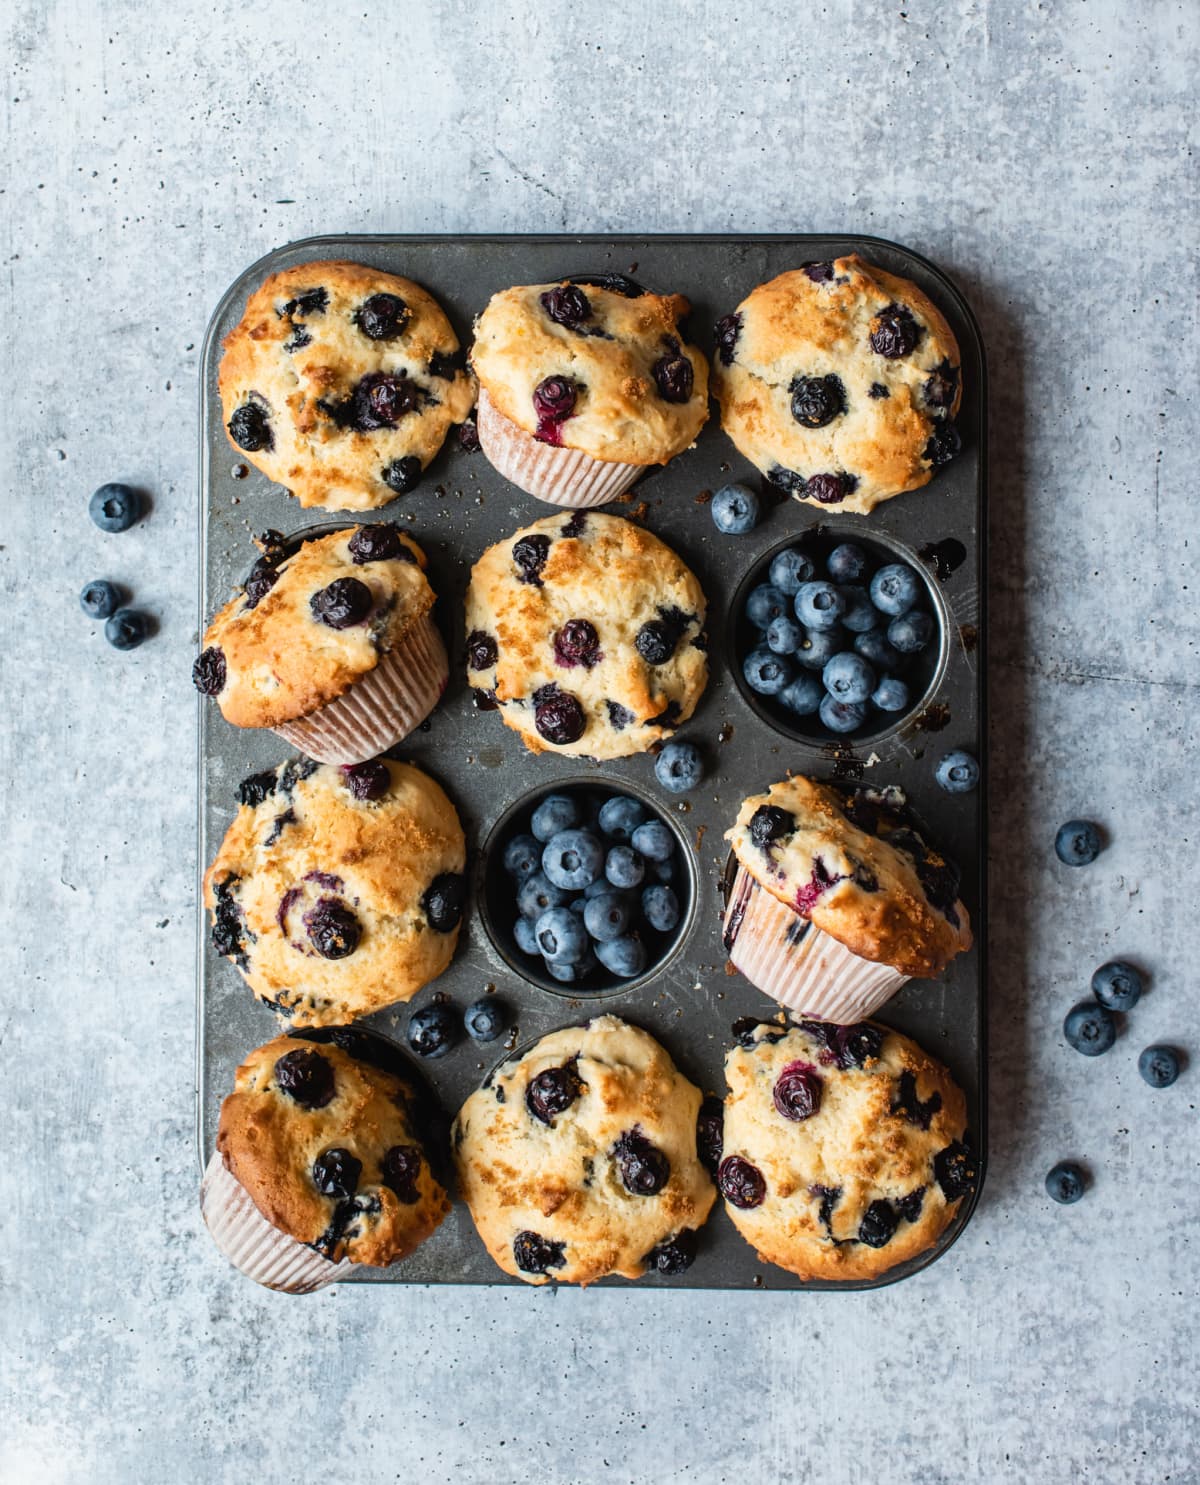 A pan of blueberry muffins and blueberries.